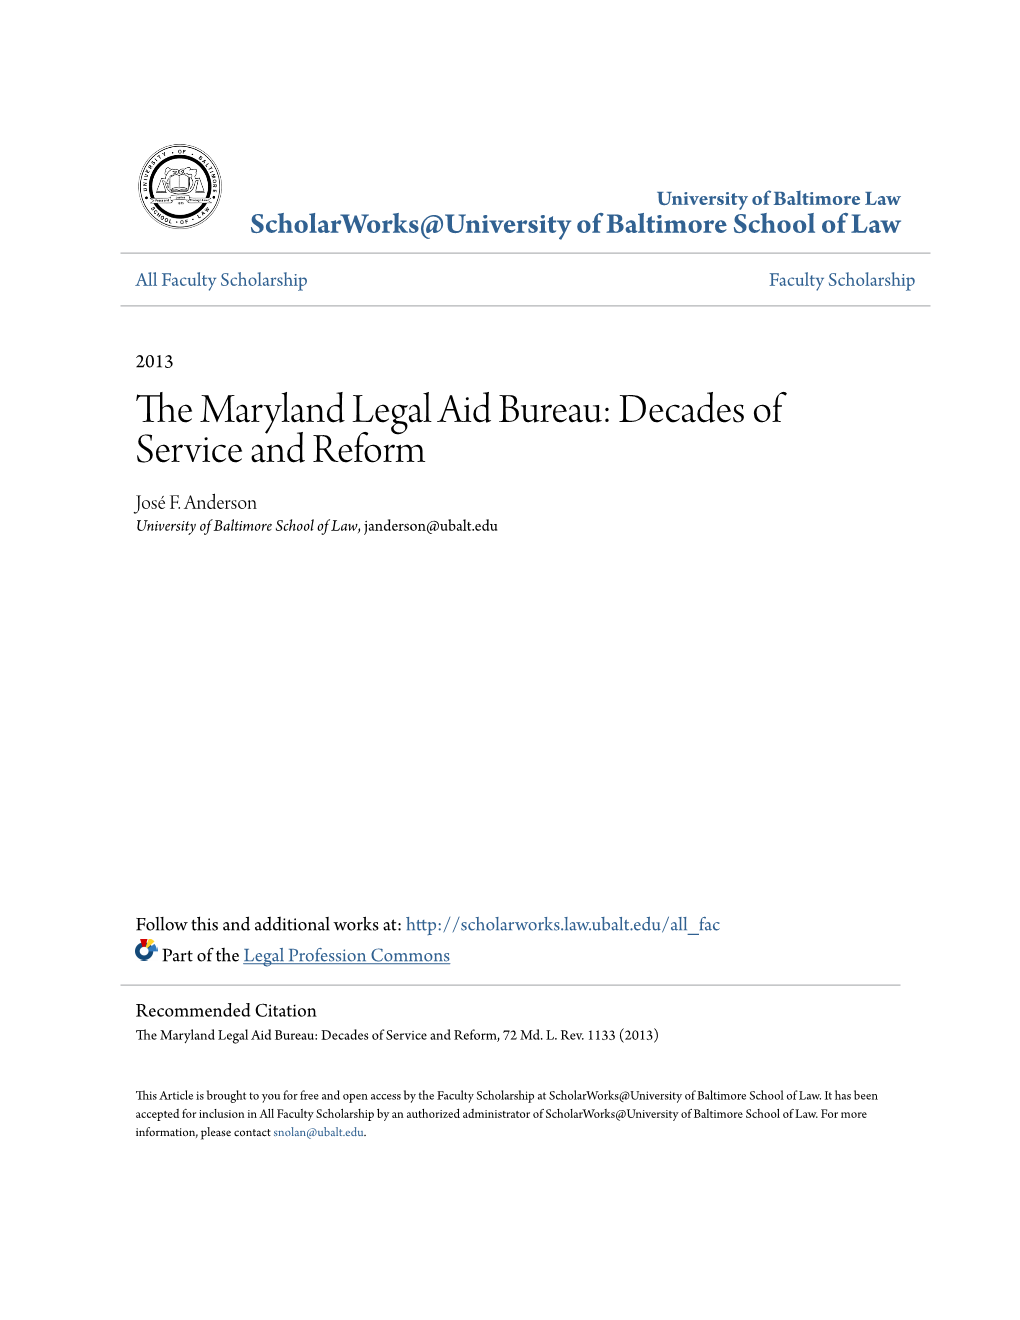 The Maryland Legal Aid Bureau: Decades of Service and Reform